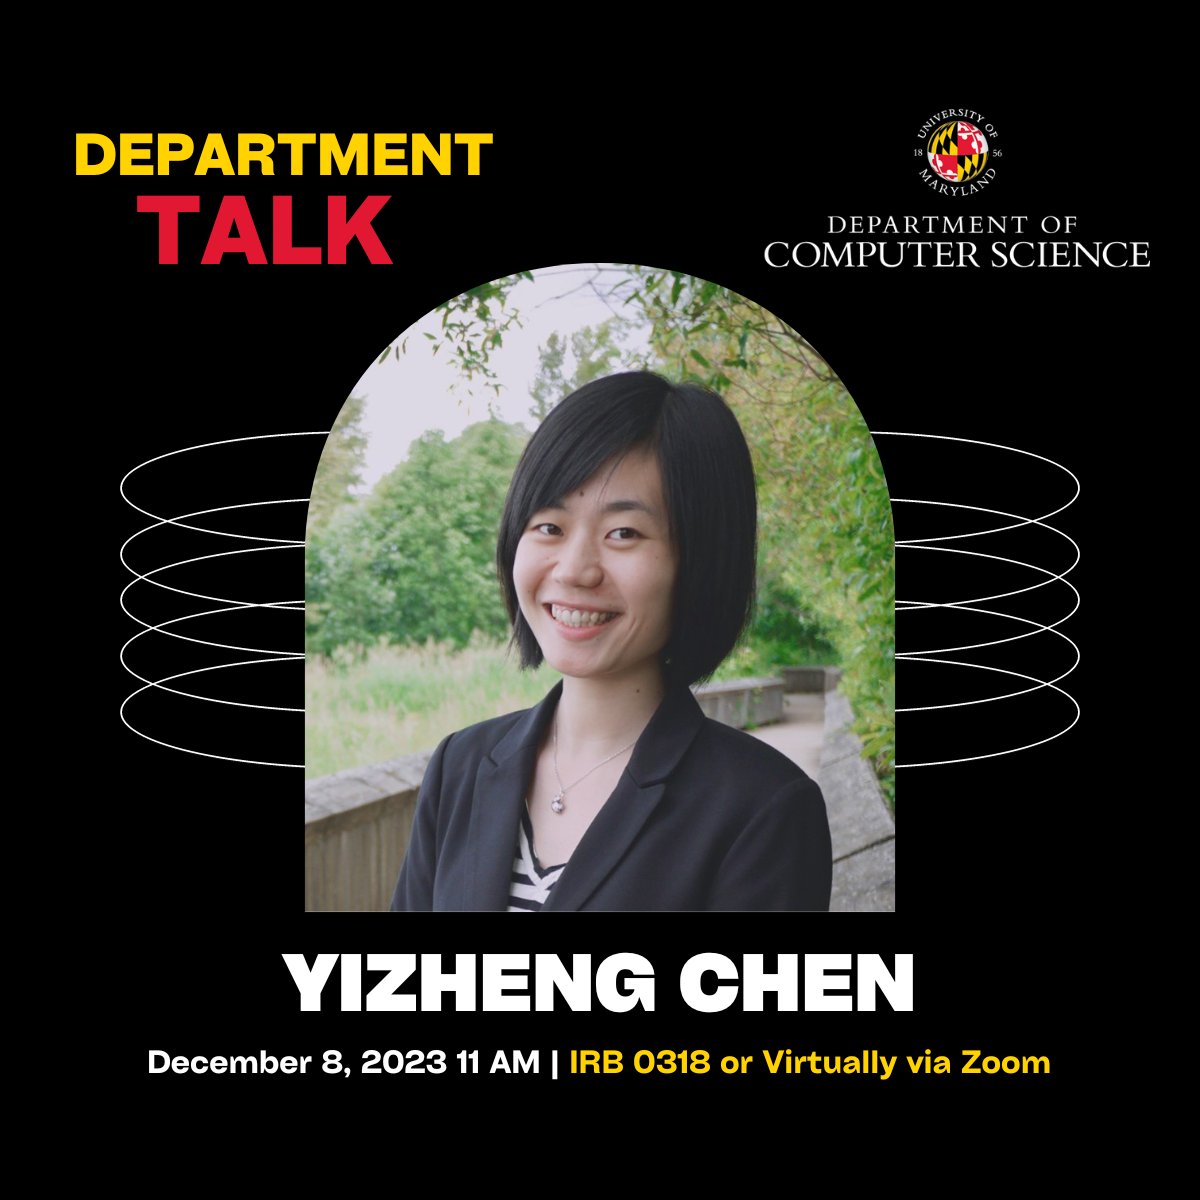 REMINDER📢: Join us for the final Fall 2023 Research Seminar Series, marking the conclusion of this semester's enlightening journey of academic exploration and discovery. Don't miss our Talk featuring @surrealyz. More info: go.umd.edu/DeptTalk